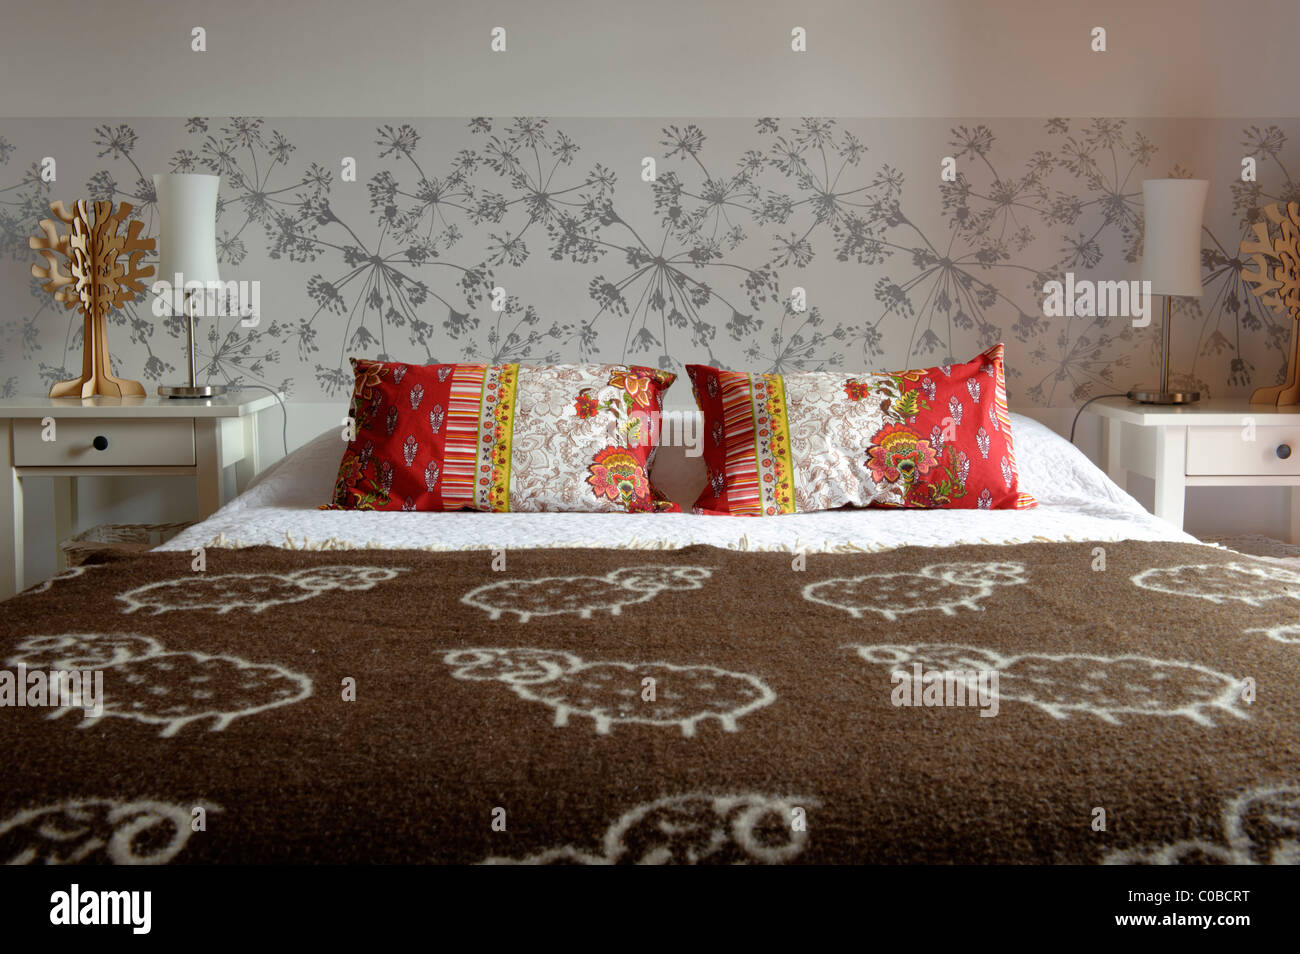 Bedroom bed with bedside tables and lamps Stock Photo